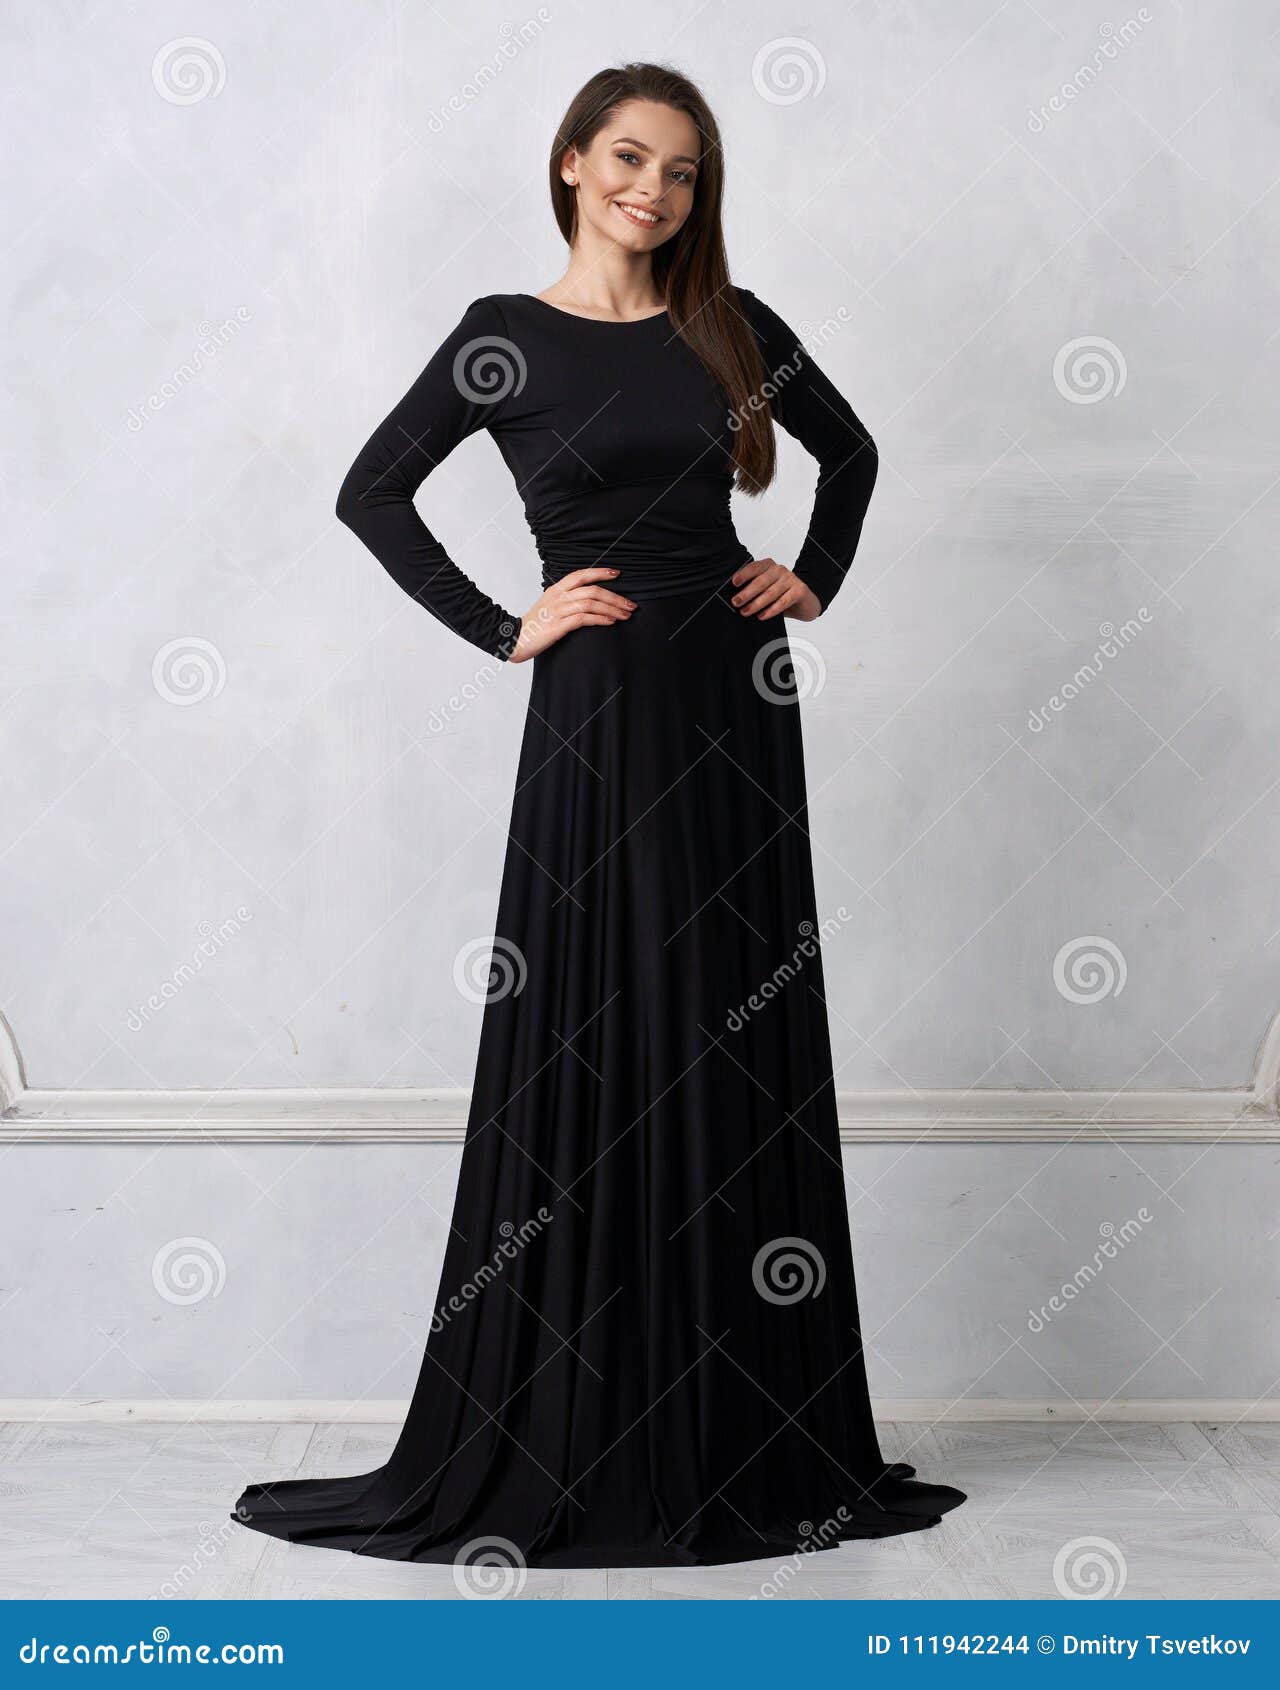 Young Brunette Woman in Black Evening Dress Stock Photo - Image of ...